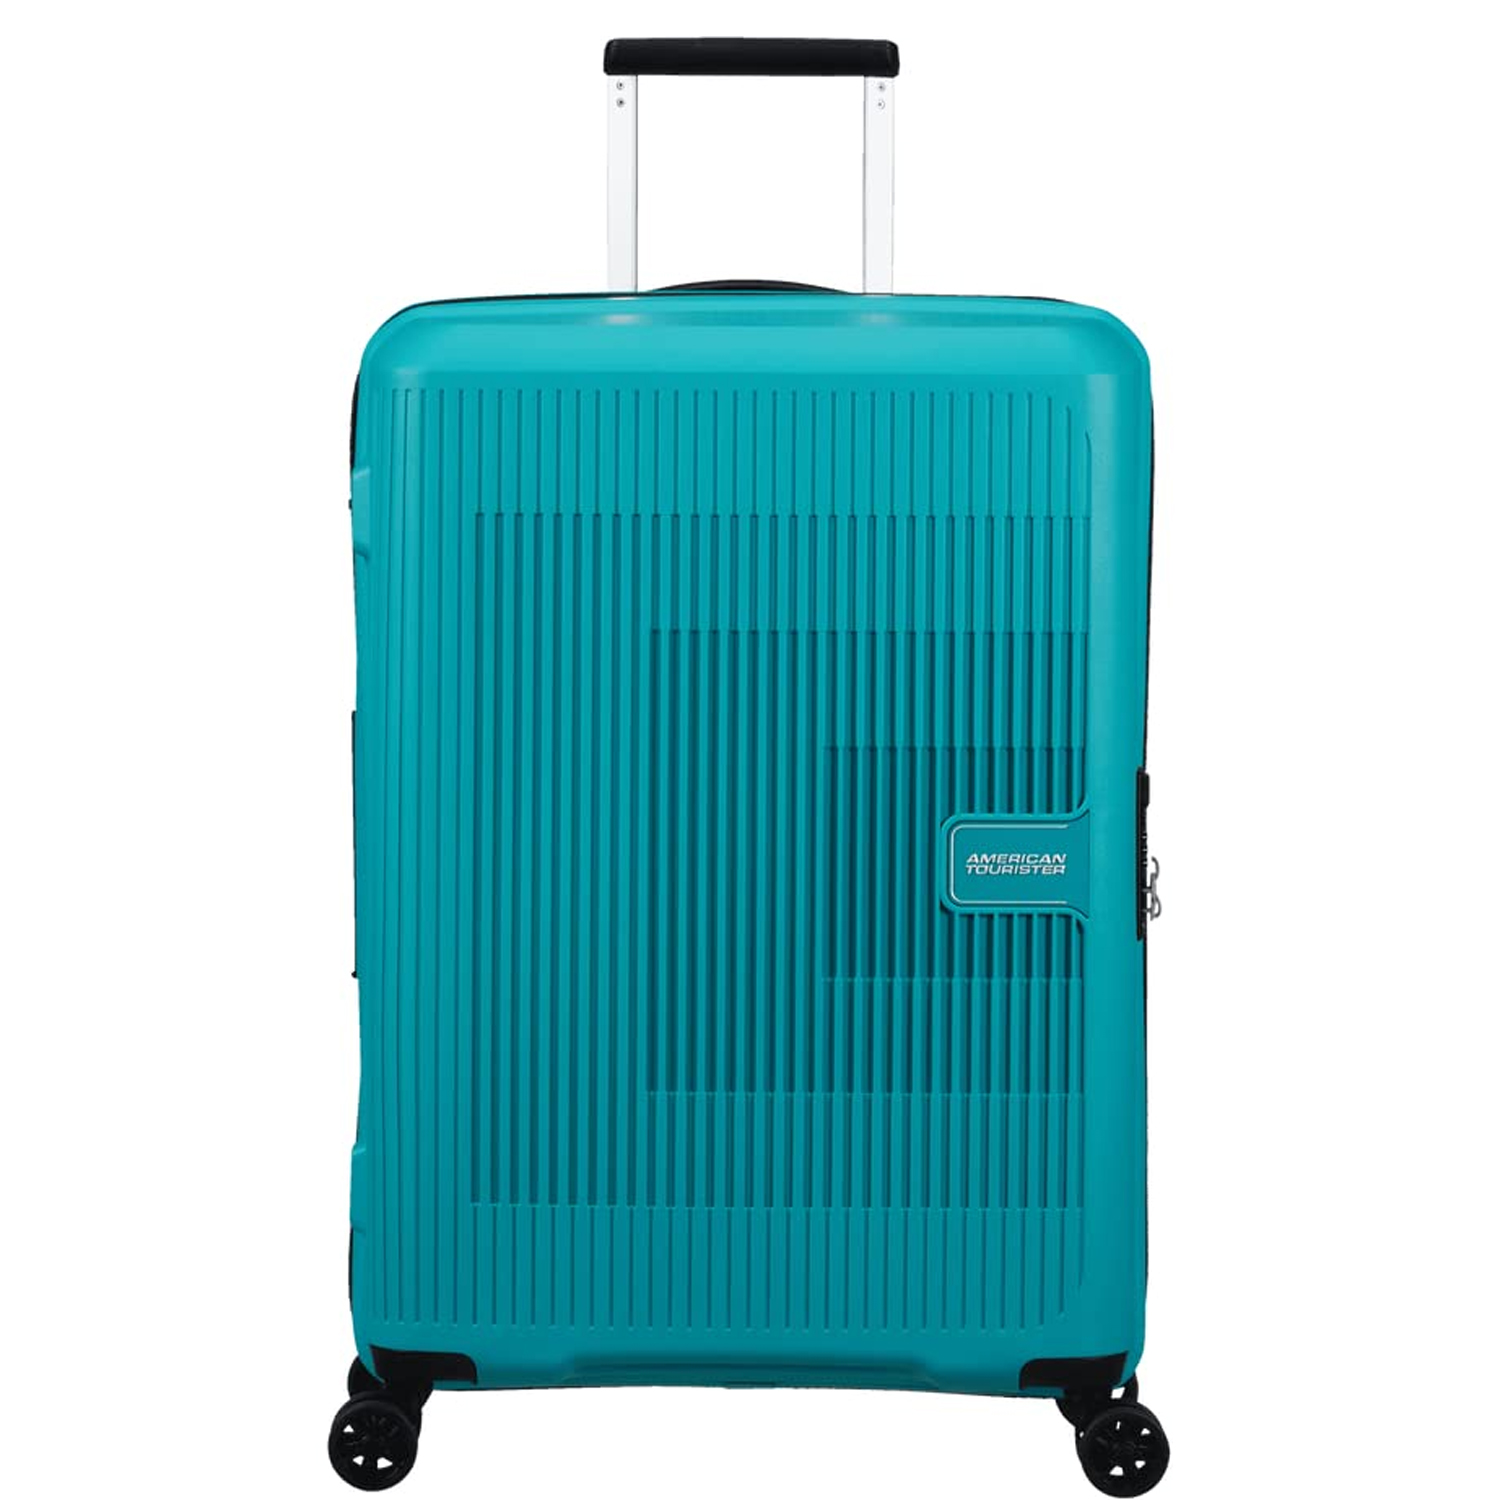 RoshanBags_AMERICAN TOURISTER AEROSTEP 8W LIGHT WEIGHT STROLLY TURQUOISE TONIC